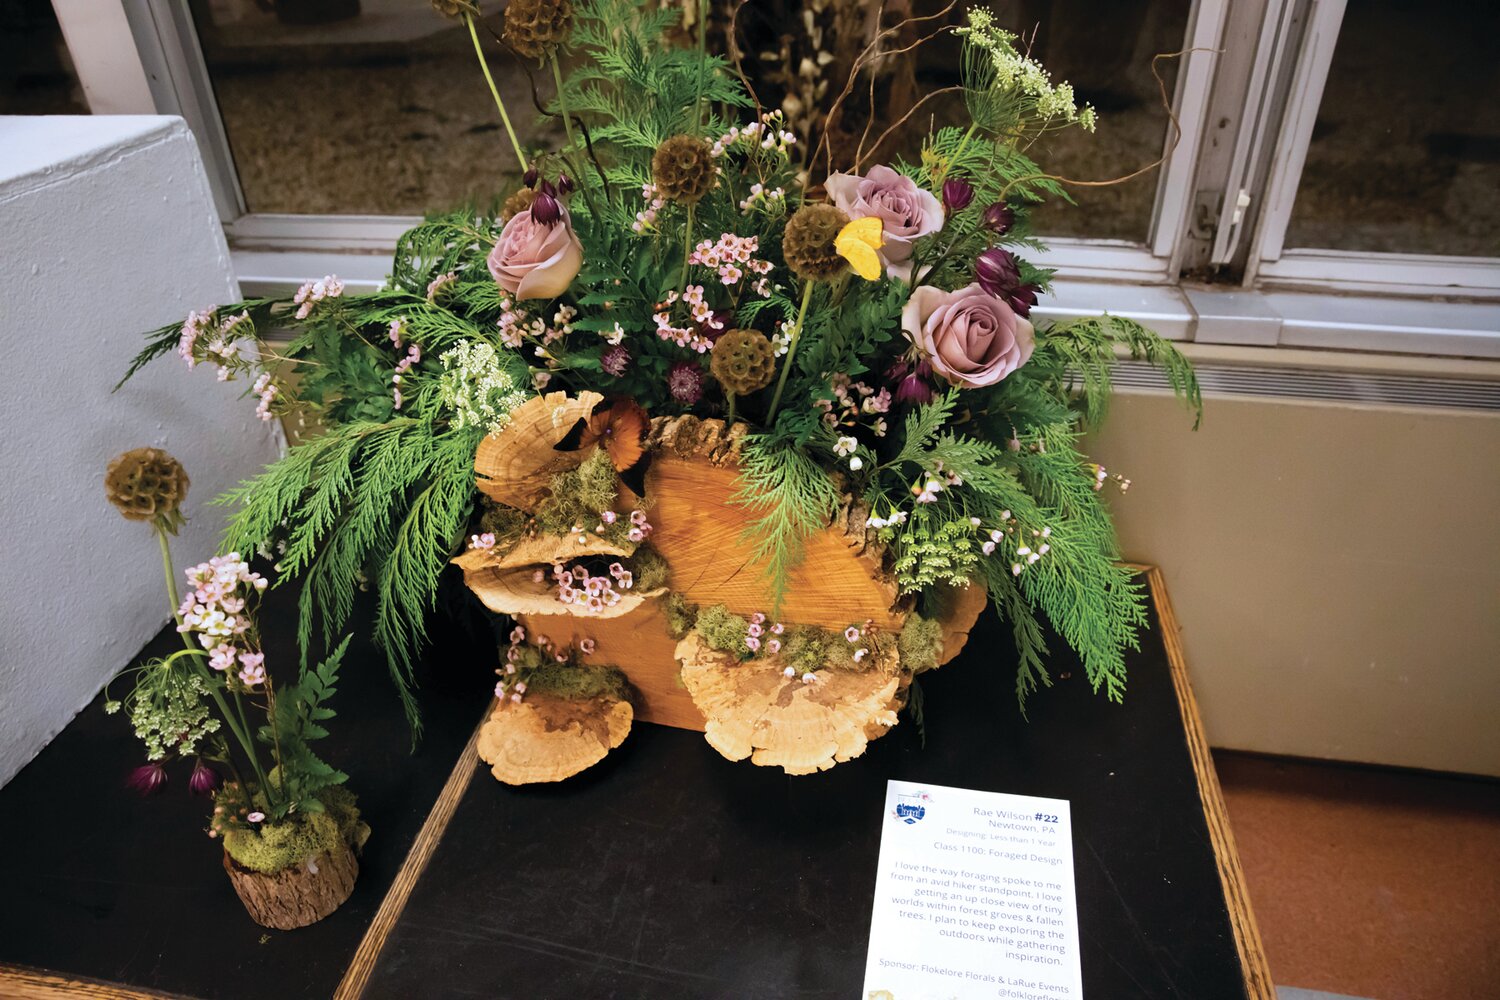 A sampling of the interpretive floral displays by Bucks County Community College students entered in the first annual “Art That Blooms” exhibition.